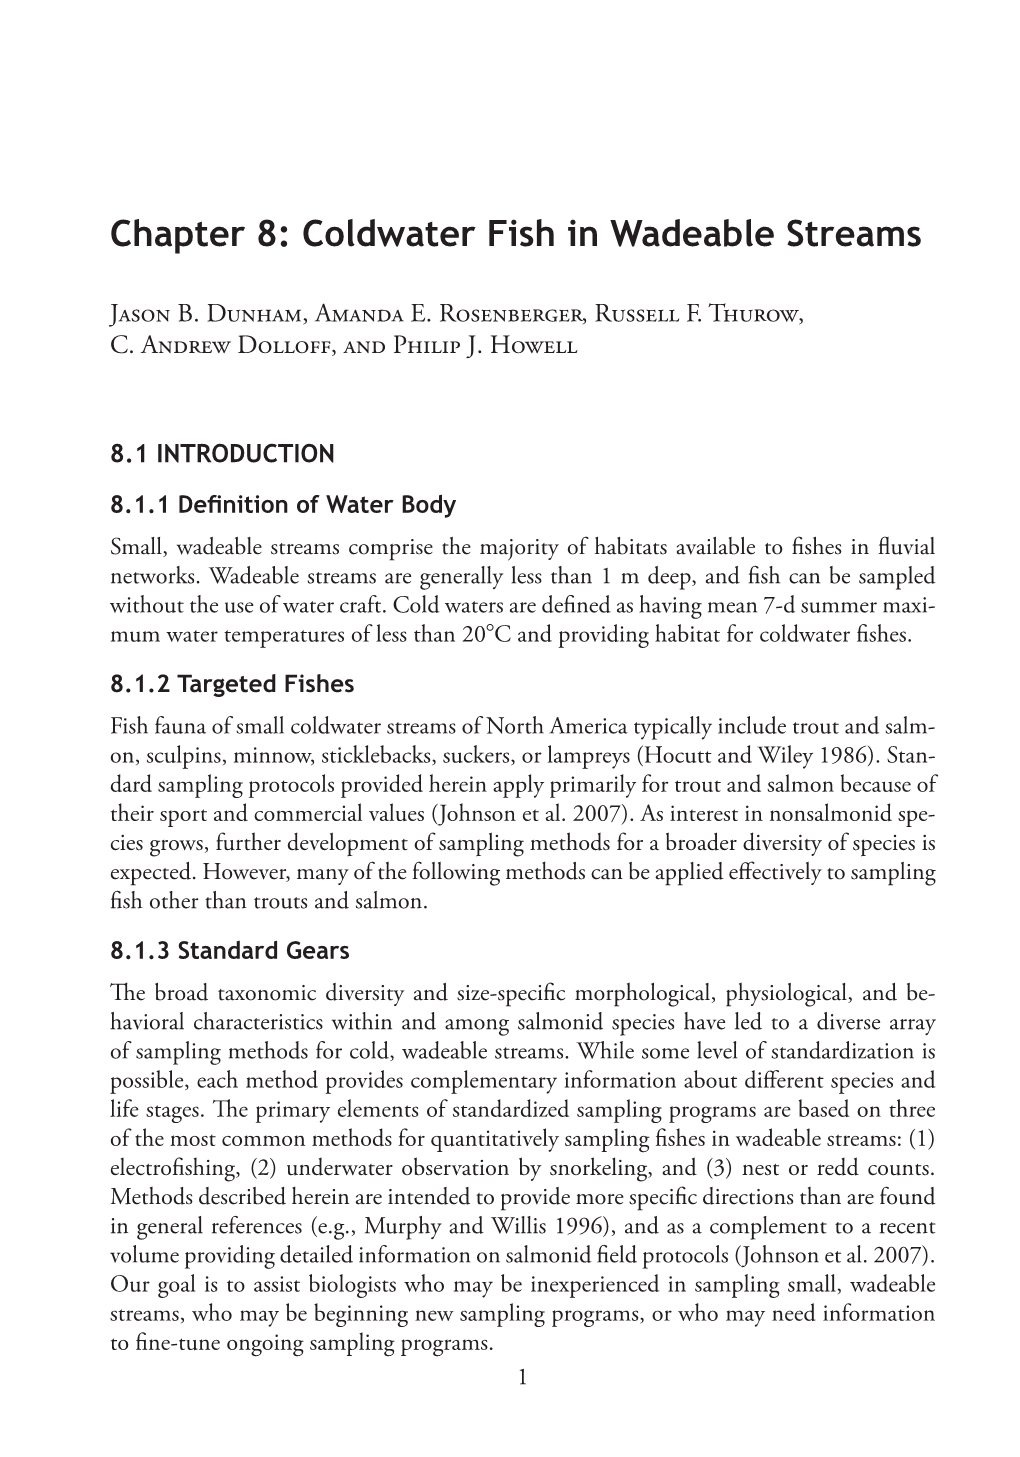 Coldwater Fish in Wadeable Streams [Chapter 8]